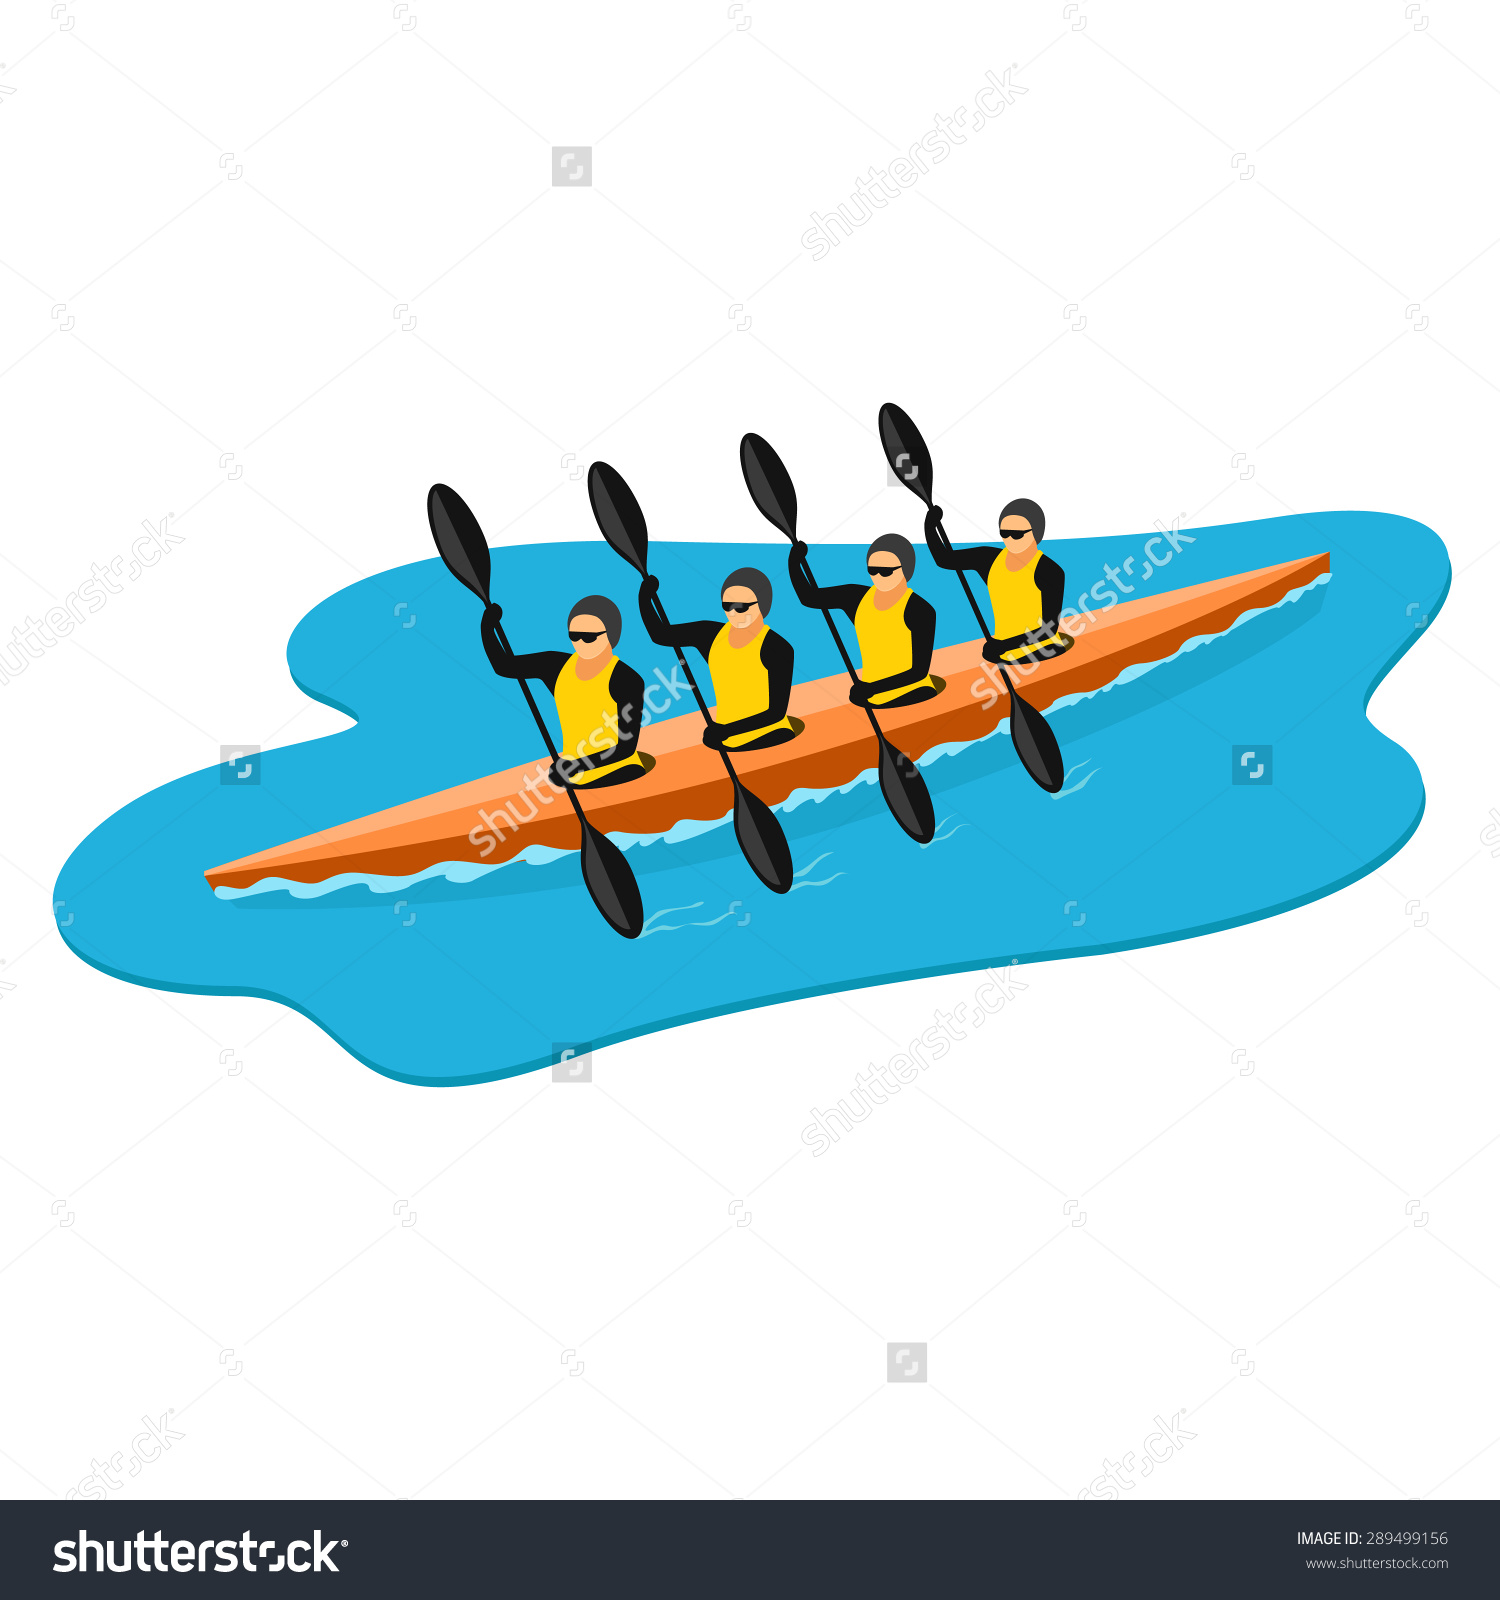 Team rowing clipart.